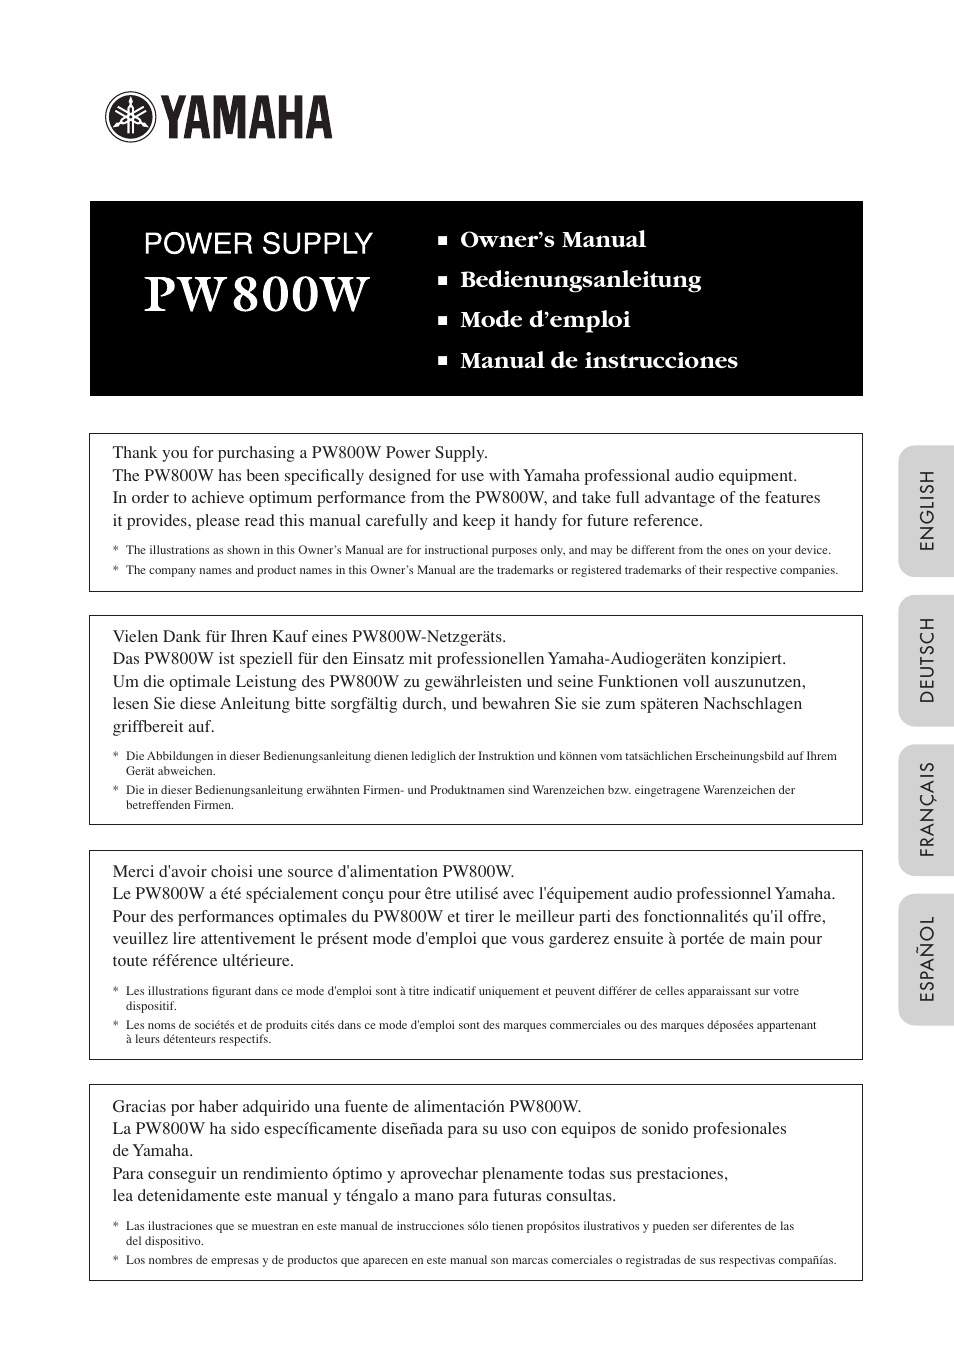 Yamaha PW800W User Manual | 10 pages